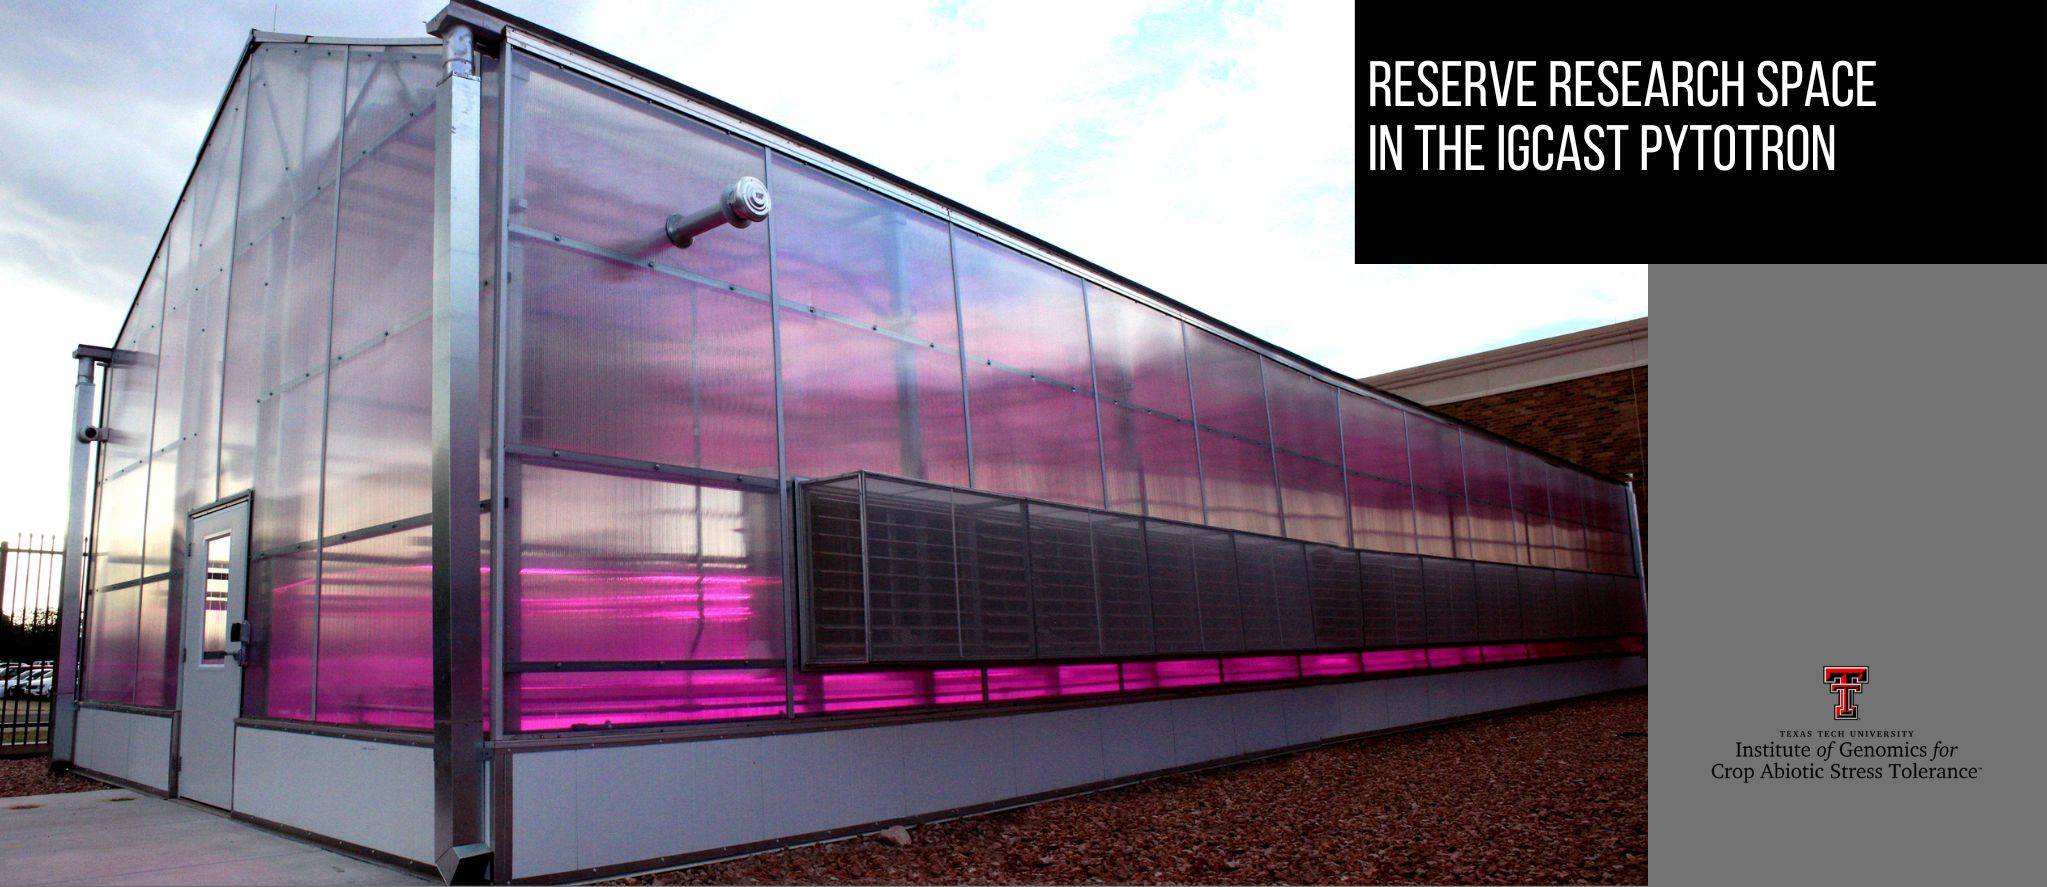 Reserve research space in the IGCAST Phytotron (greenhouse/growth chambers)